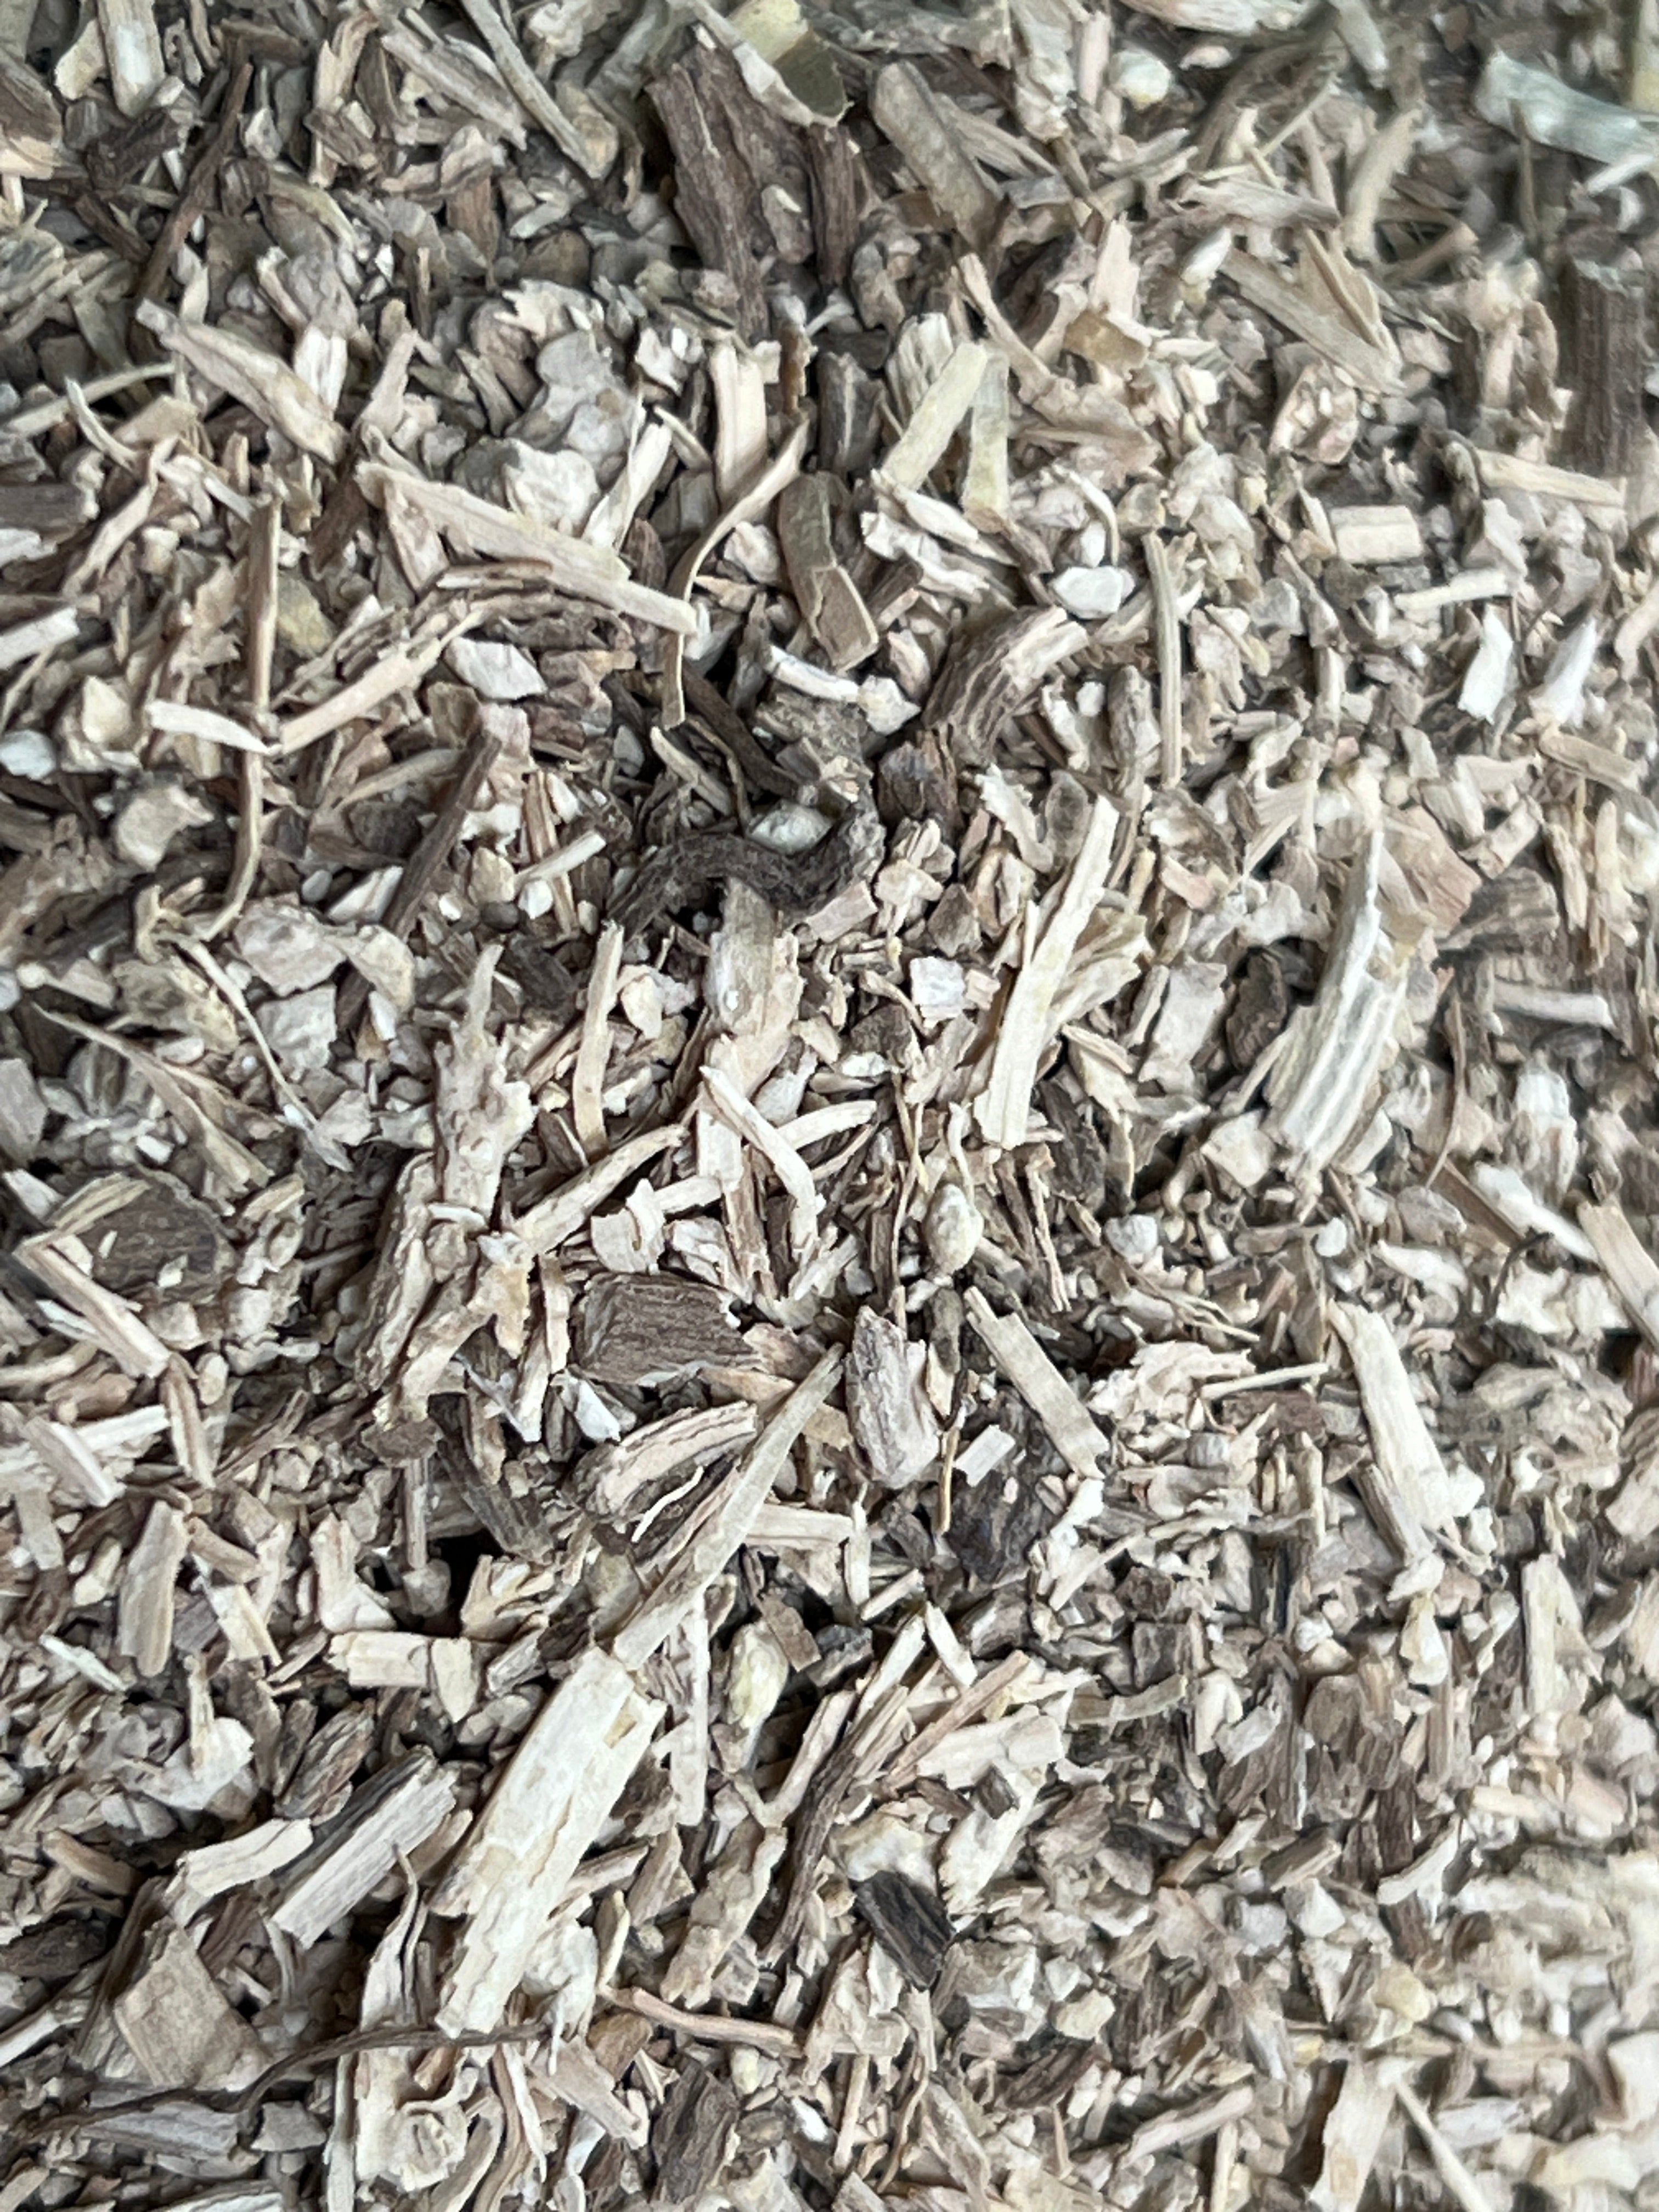 High-quality cut and sifted Kava Kava herb cultivated using Korean Natural Farming at Sacred Plant Co in the Colorado mountains